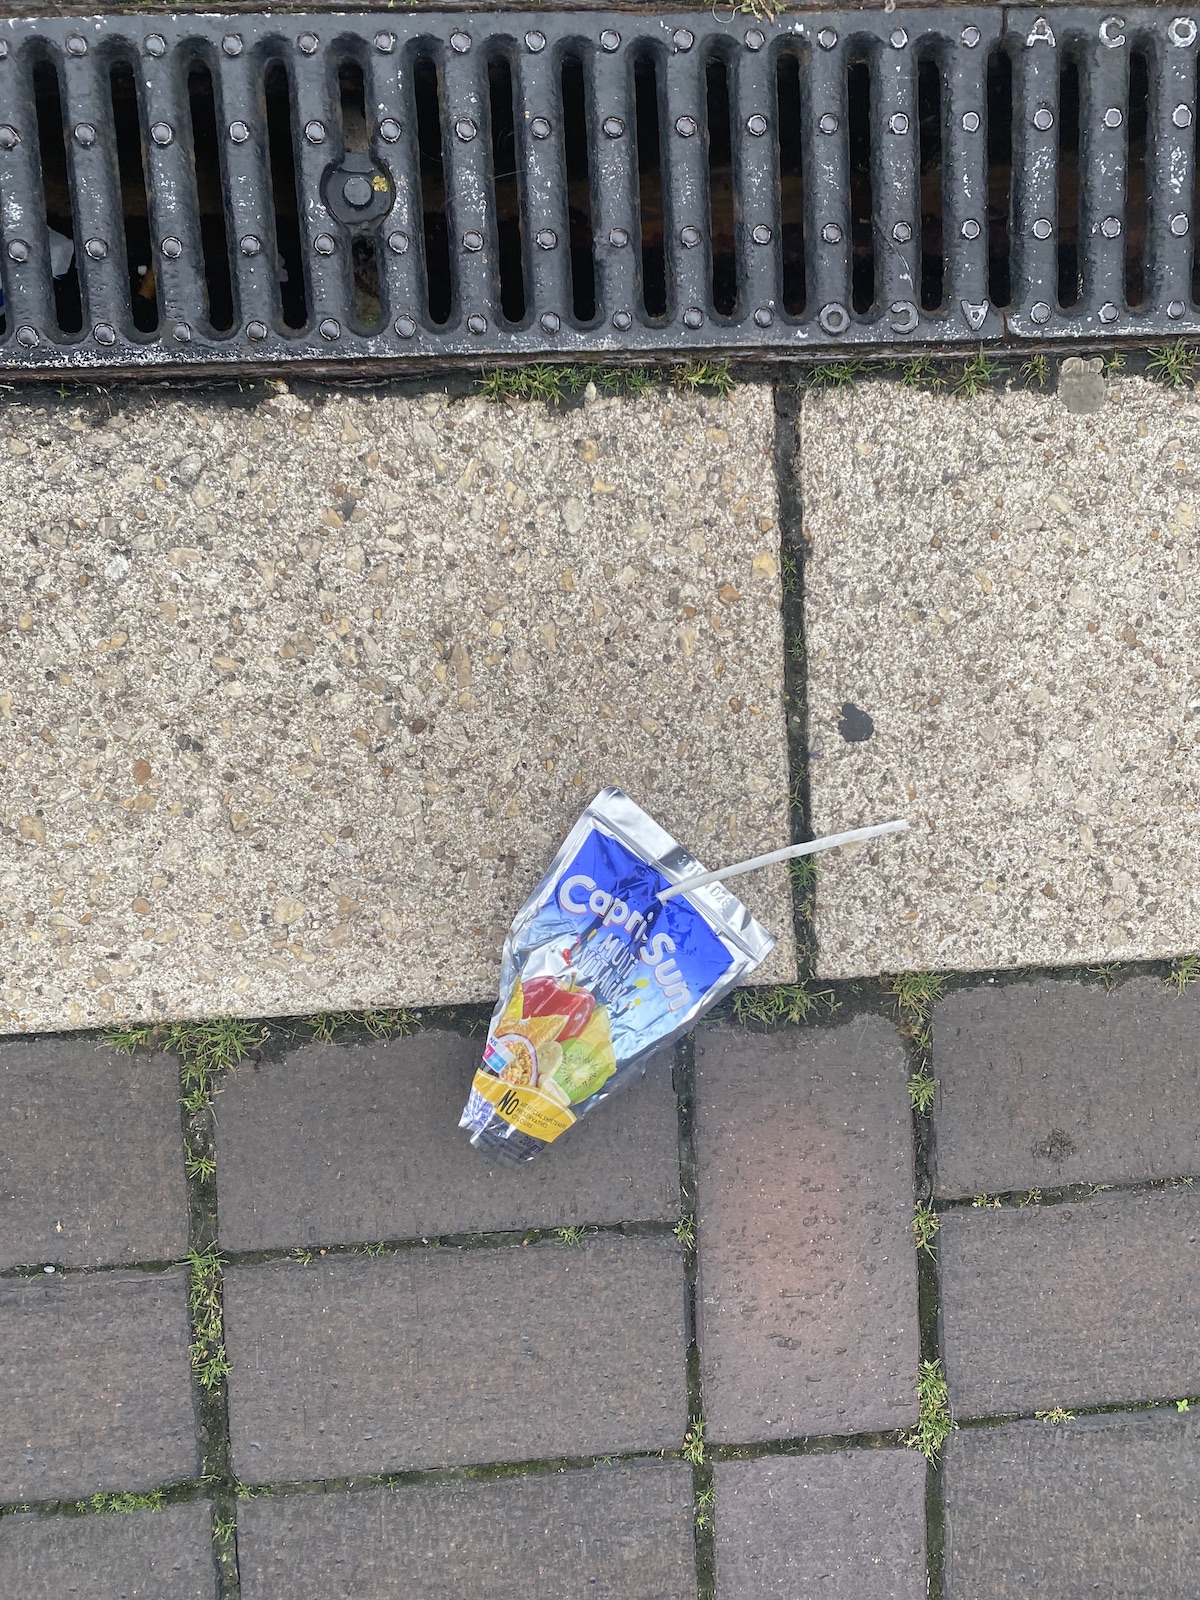 an empty package of capri sun drink on the ground near a grate